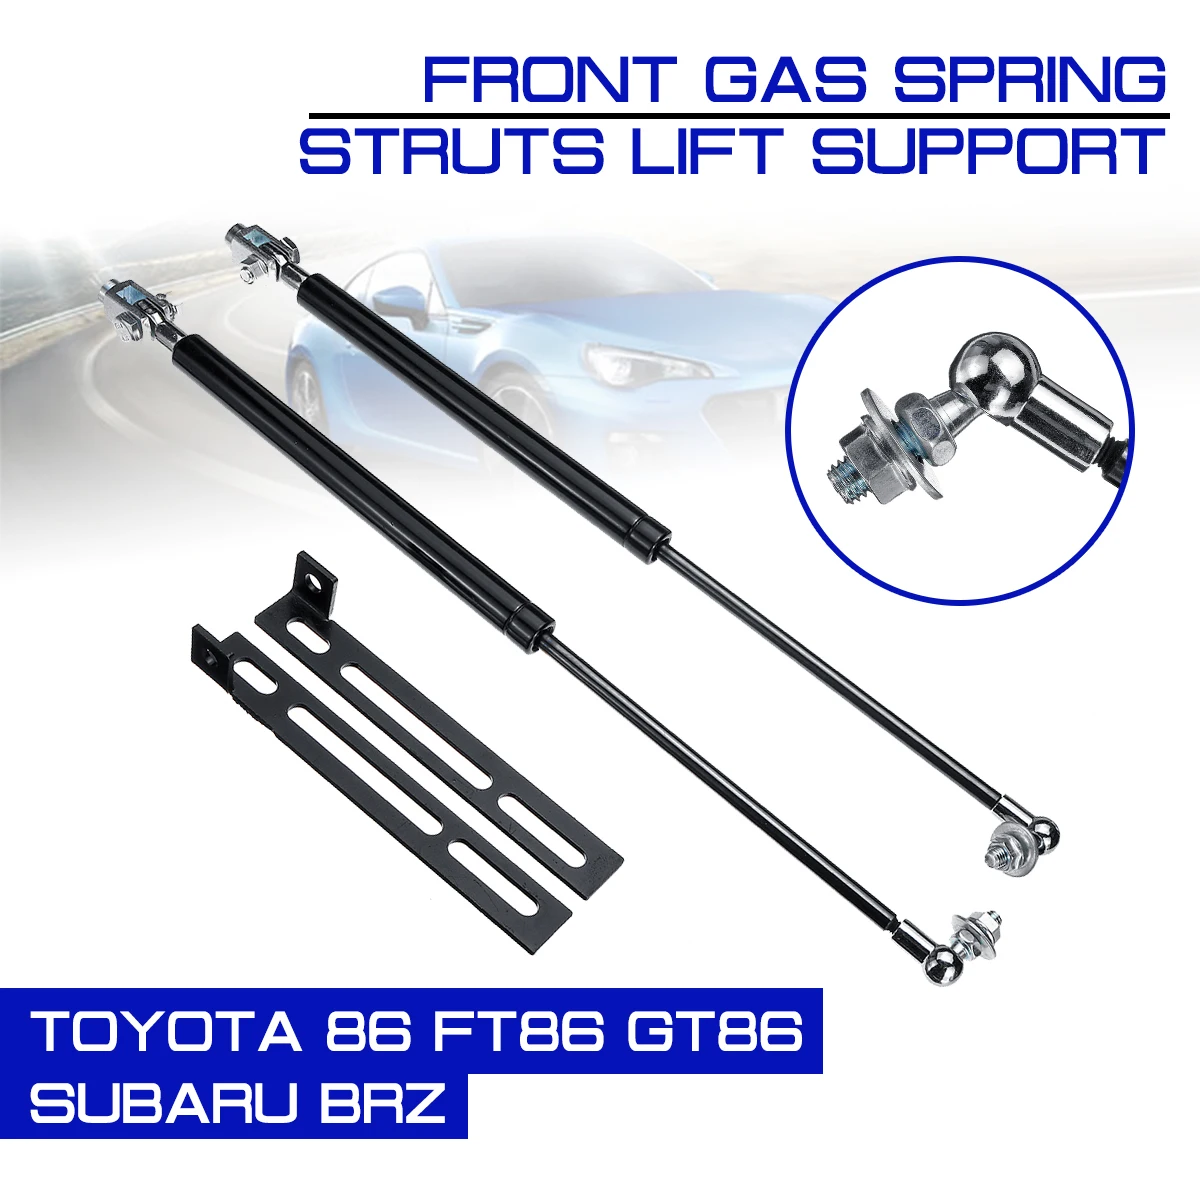 

Front Engine Cover Hood Shock Lift Struts For Toyota 86 FT86 GT86 Subaru BRZ Scion FR-S Bar Support Arm Rod Hydraulic Gas Spring